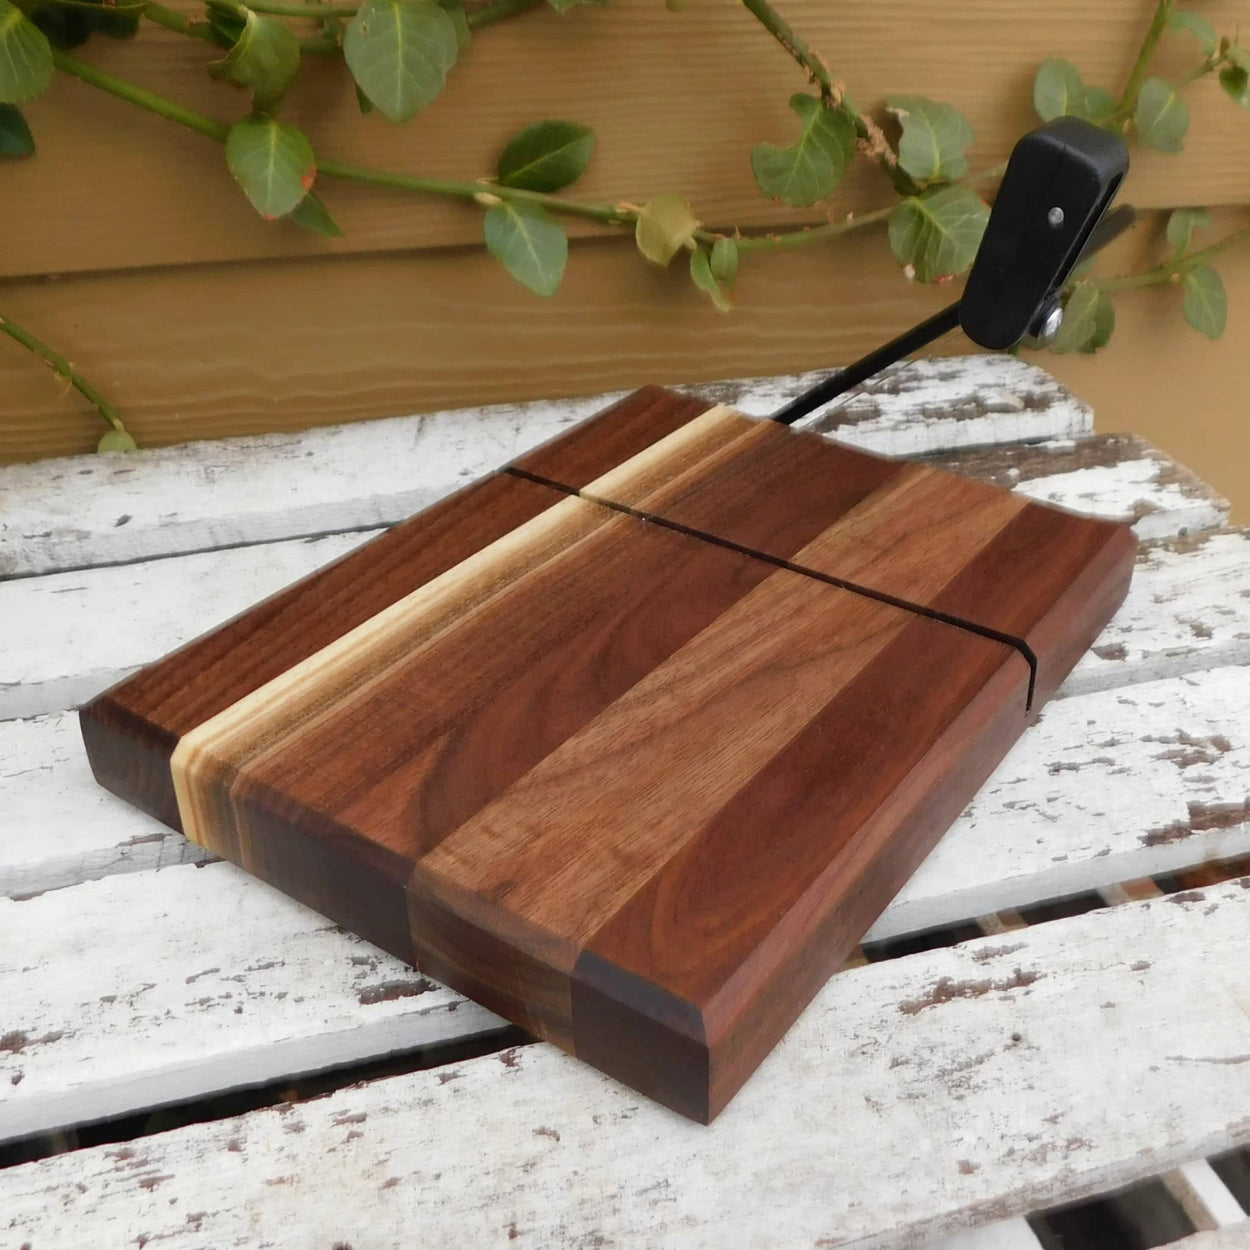 Cheese Slicing Boards